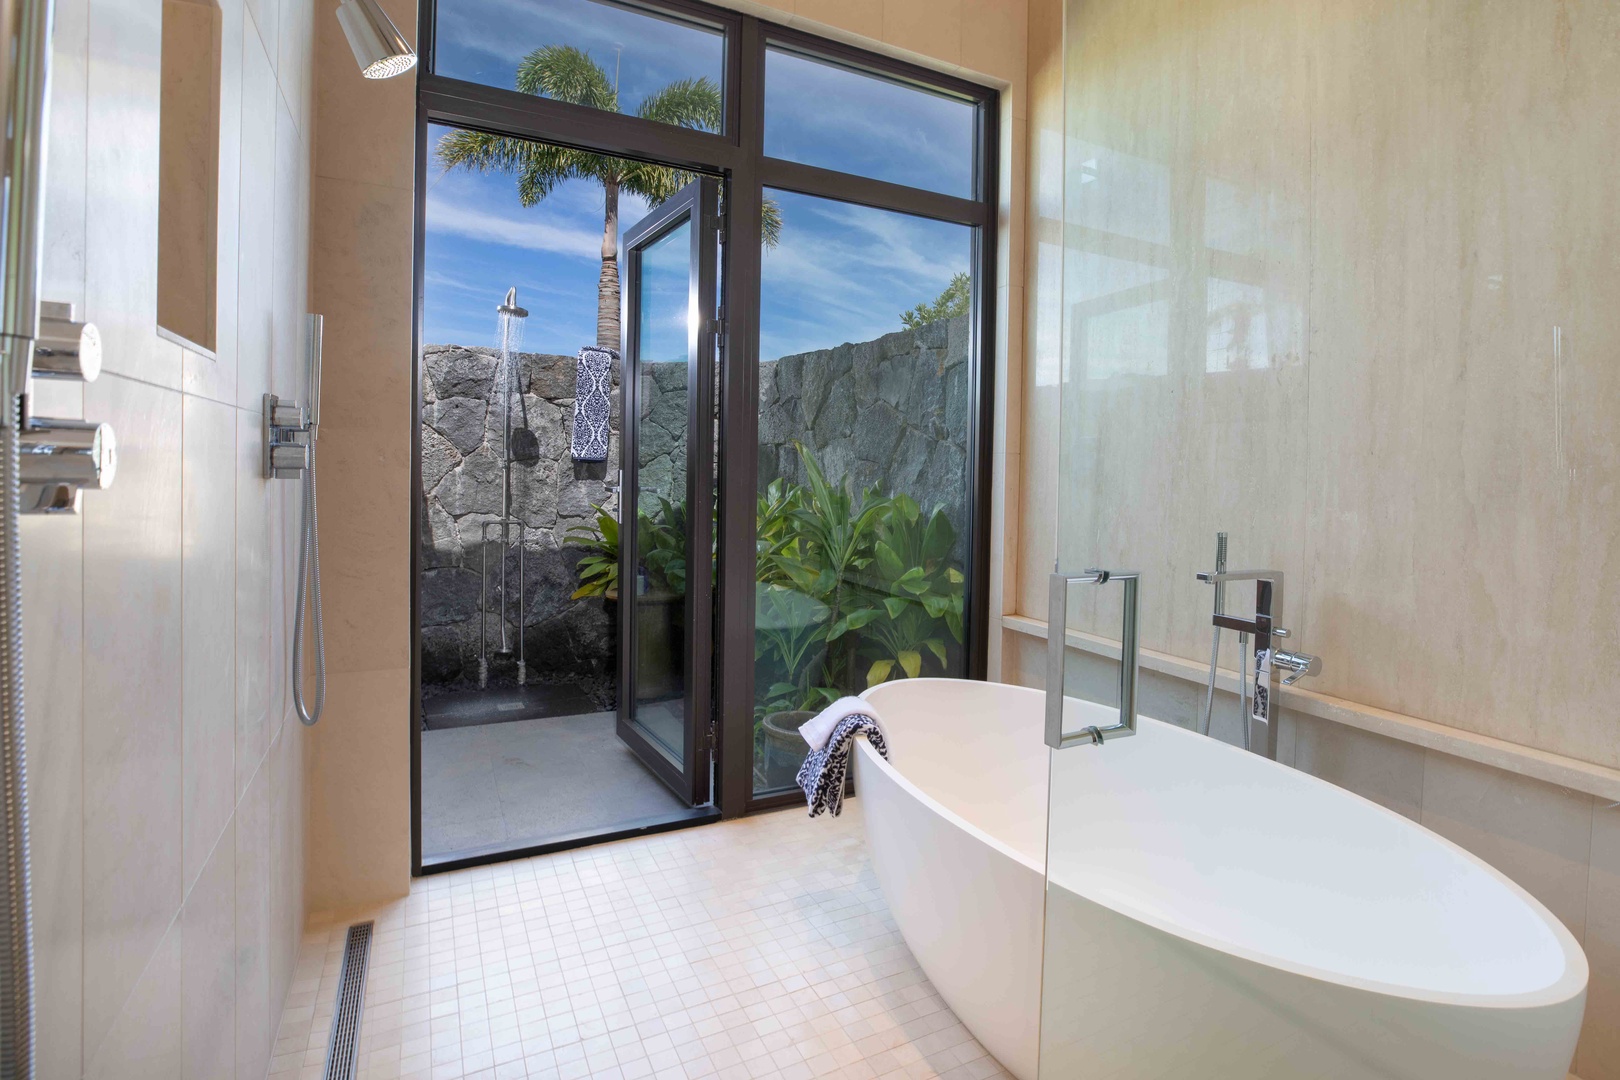 Kamuela Vacation Rentals, Hapuna Estates #8 - Primary Suite 1 with walk in shower, soaking tub, and out door shower area